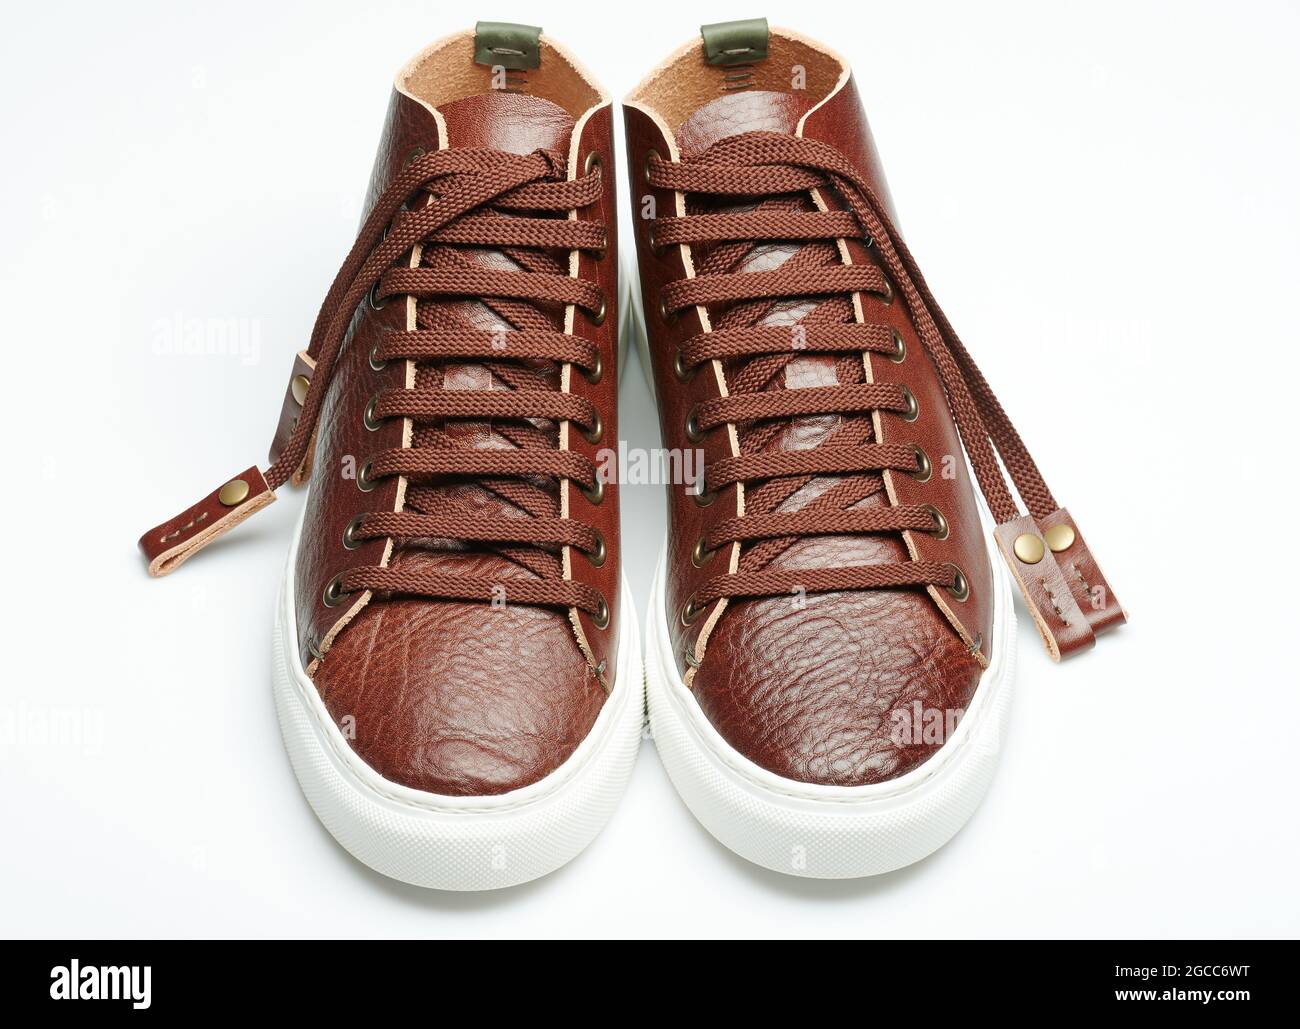 Pair of brown genuine leather sneakers shoes isolated on studio background Stock Photo